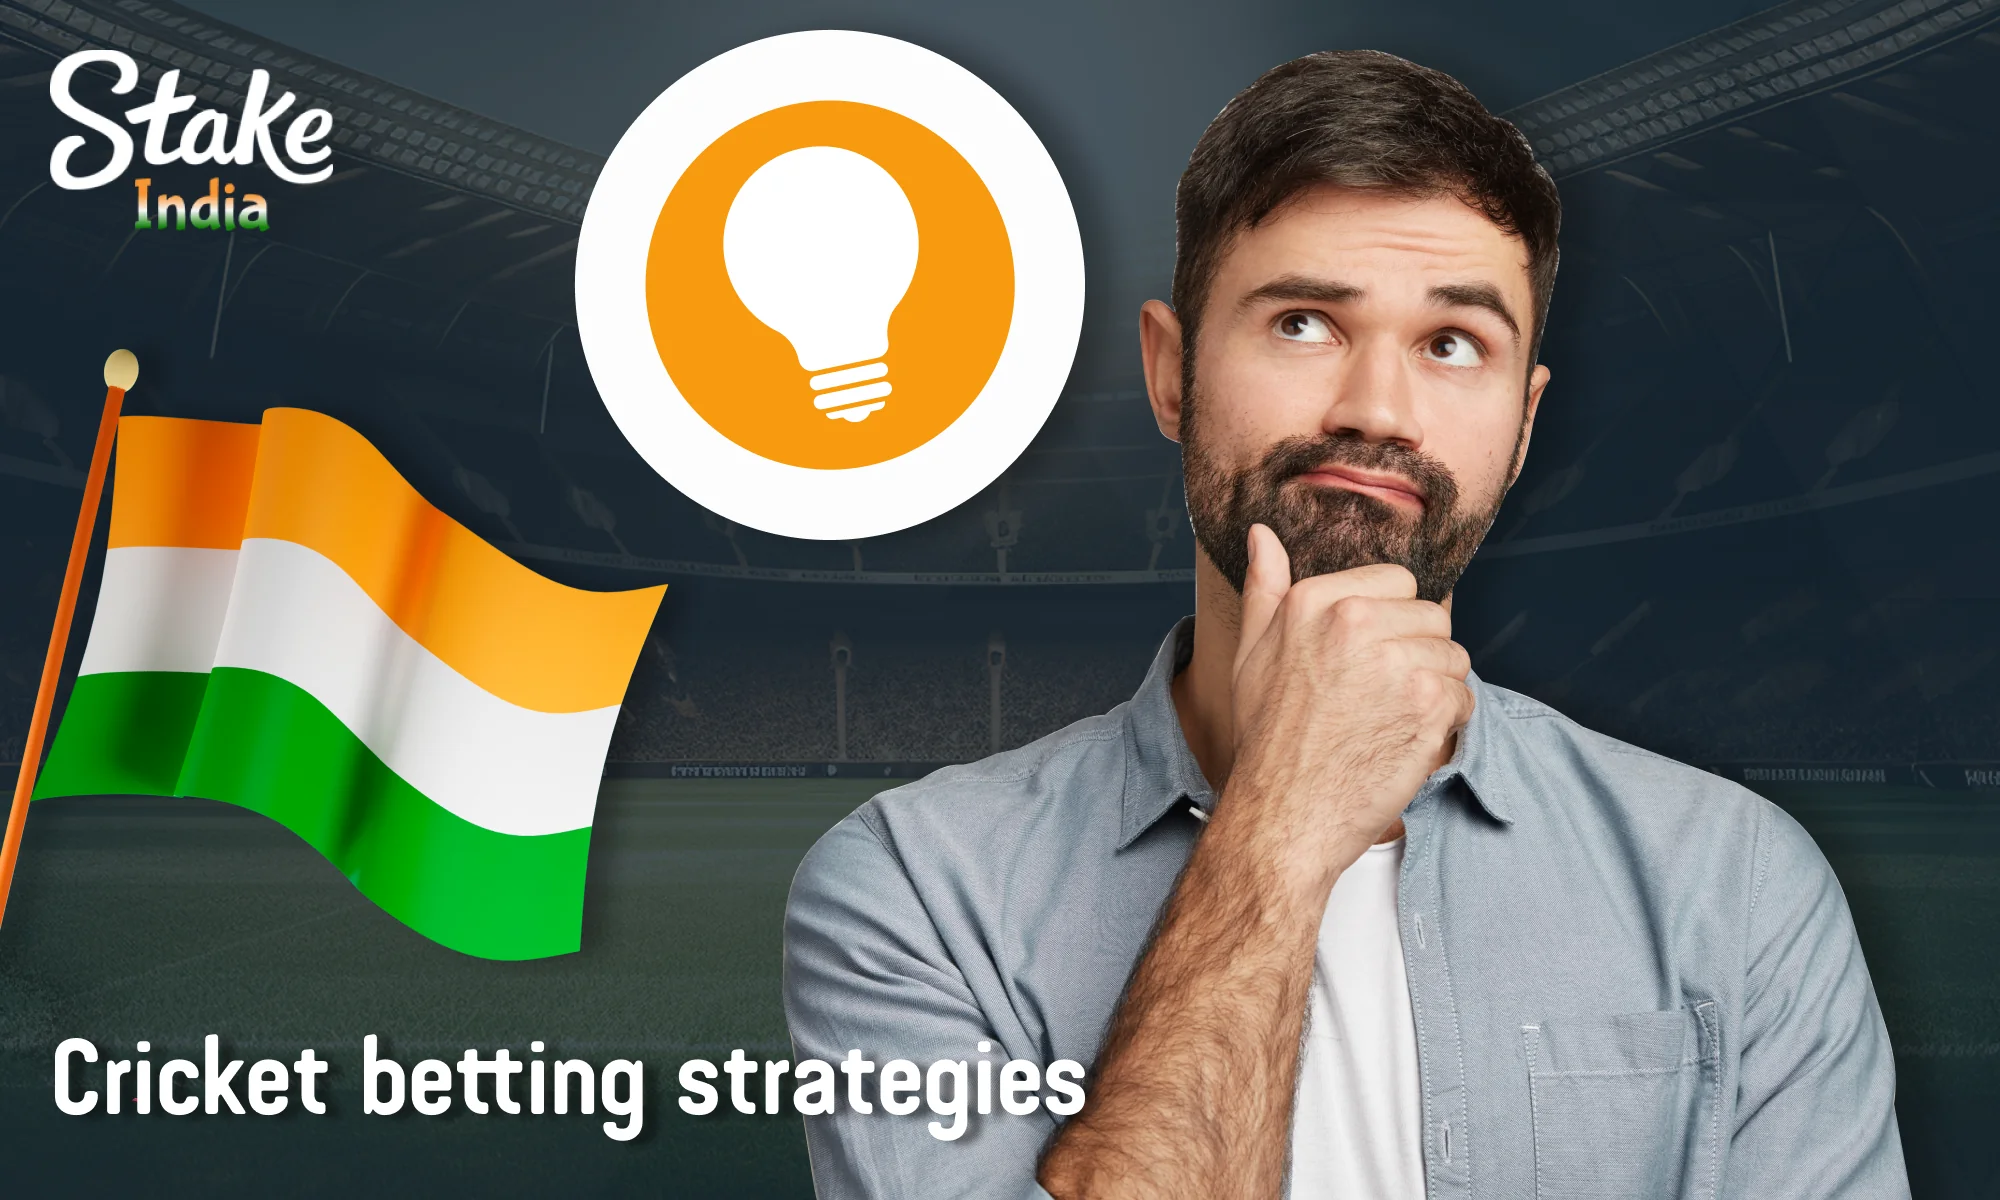 Strategies to bet on cricket at Stake India